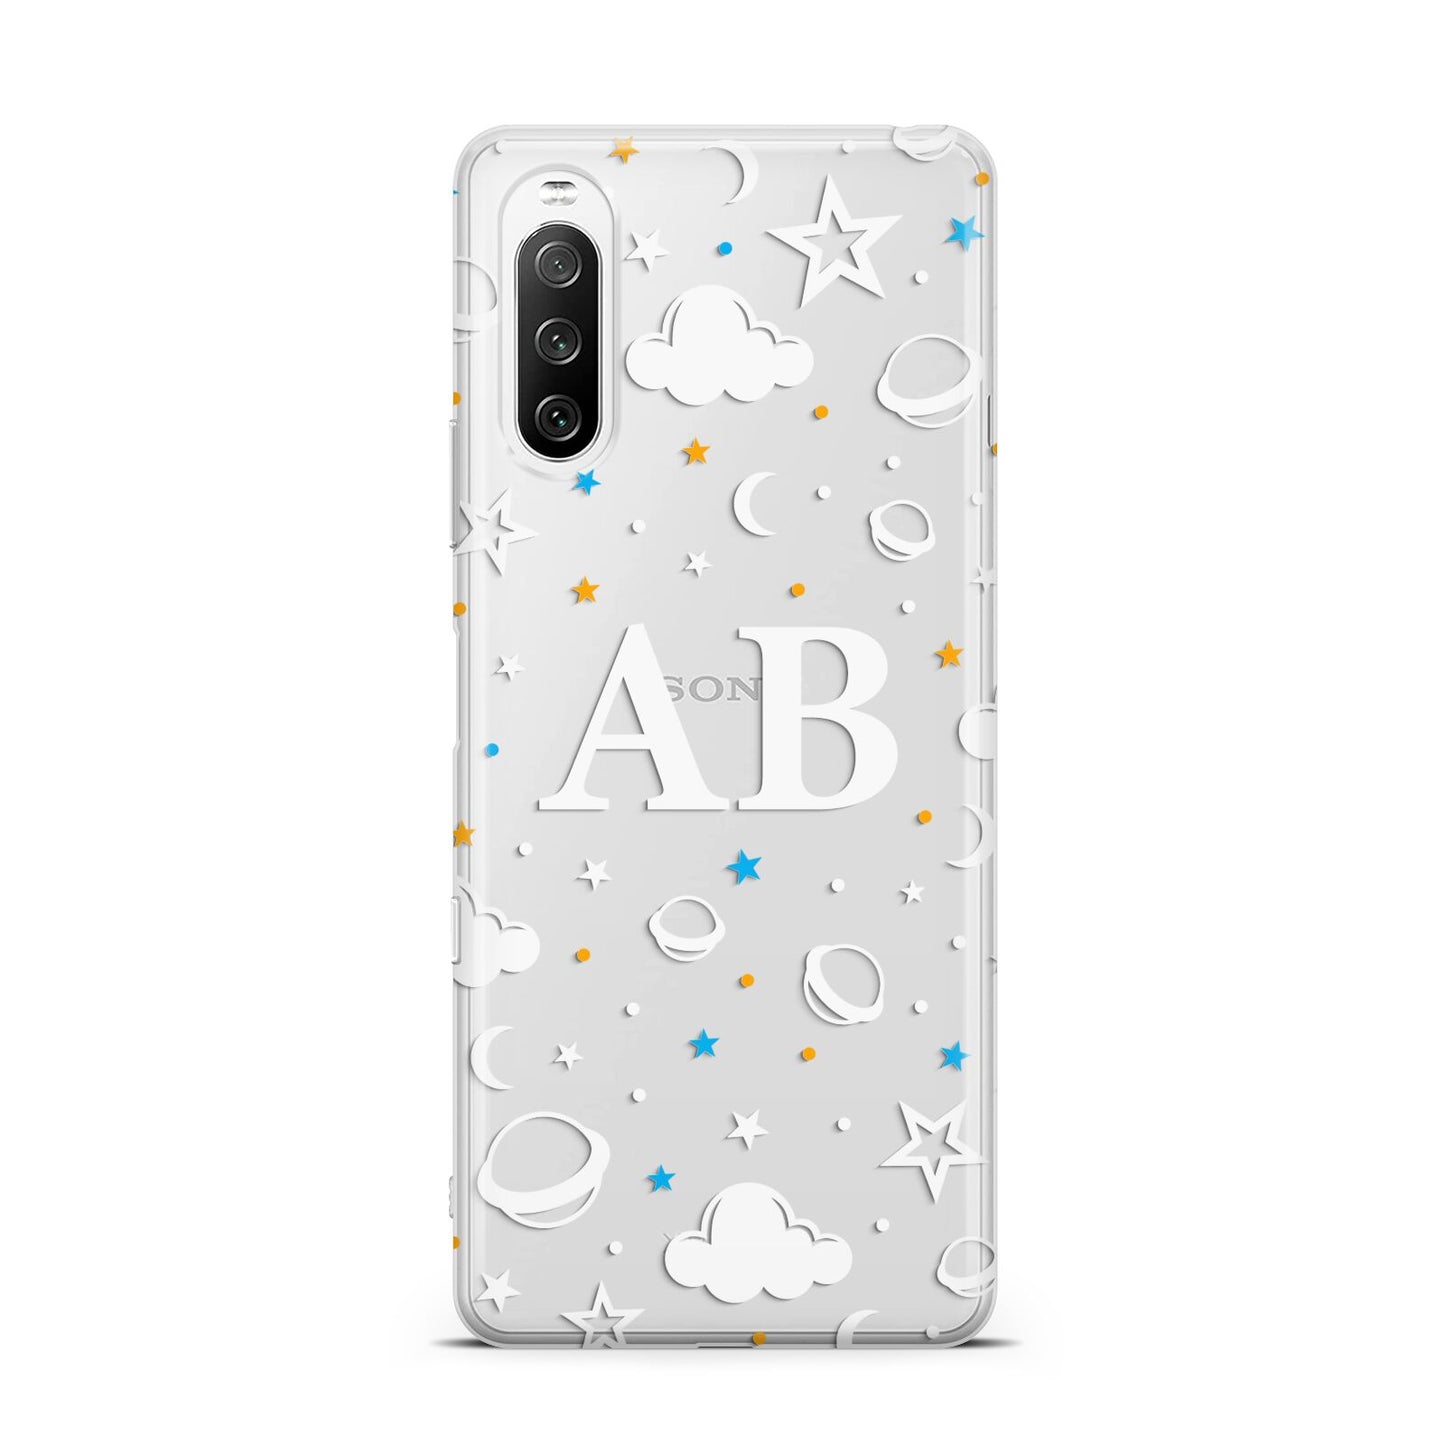 Astronomical Initials Sony Xperia 10 III Case